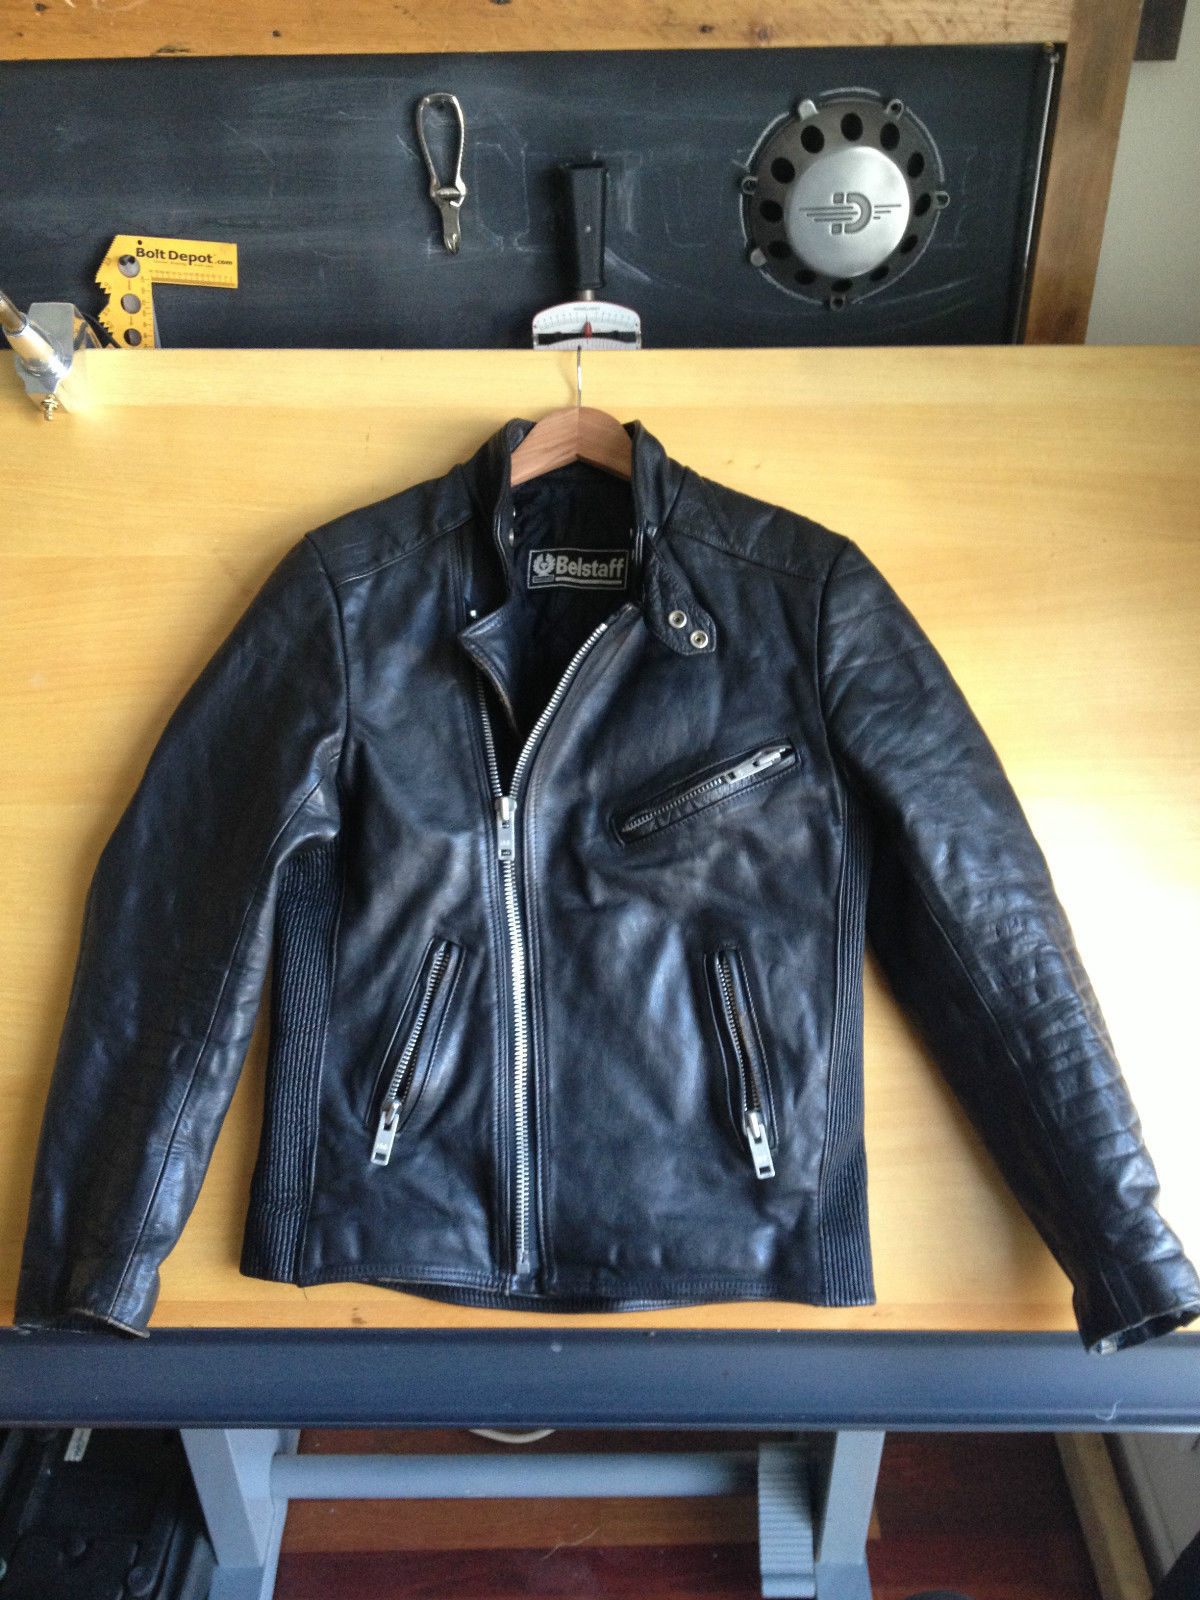 Want an Affordable Leather Jacket? Go Vintage